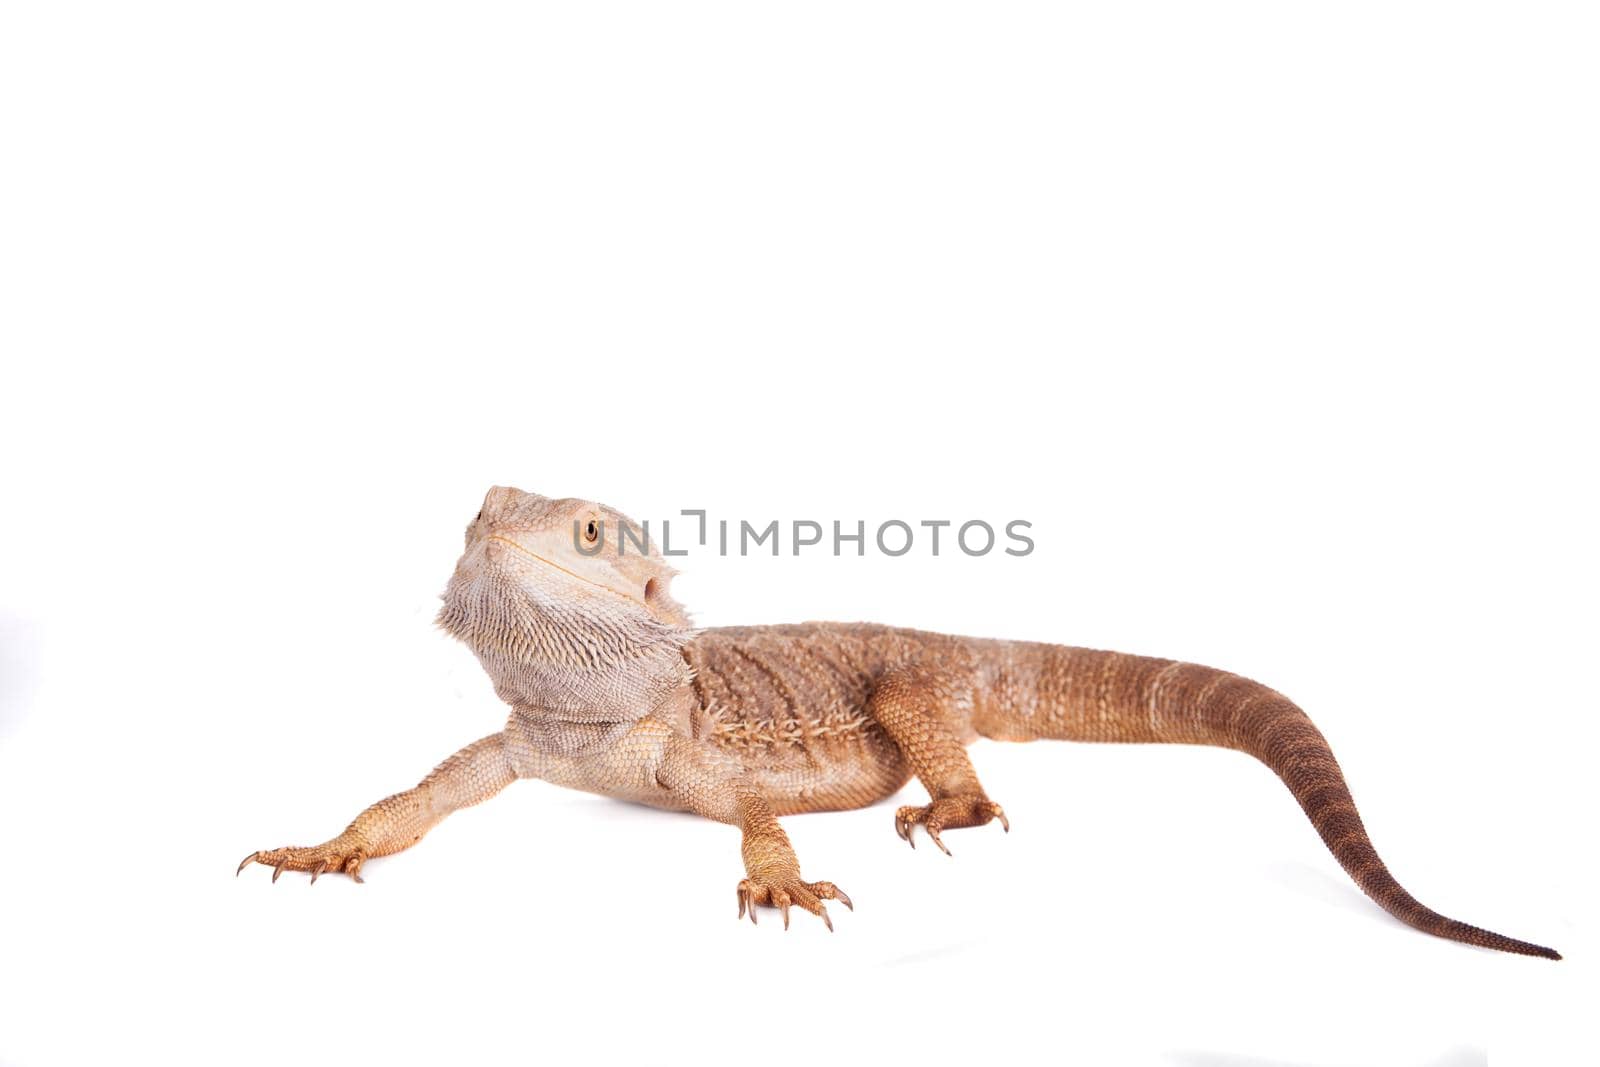 Central Bearded Dragon on white background by RosaJay